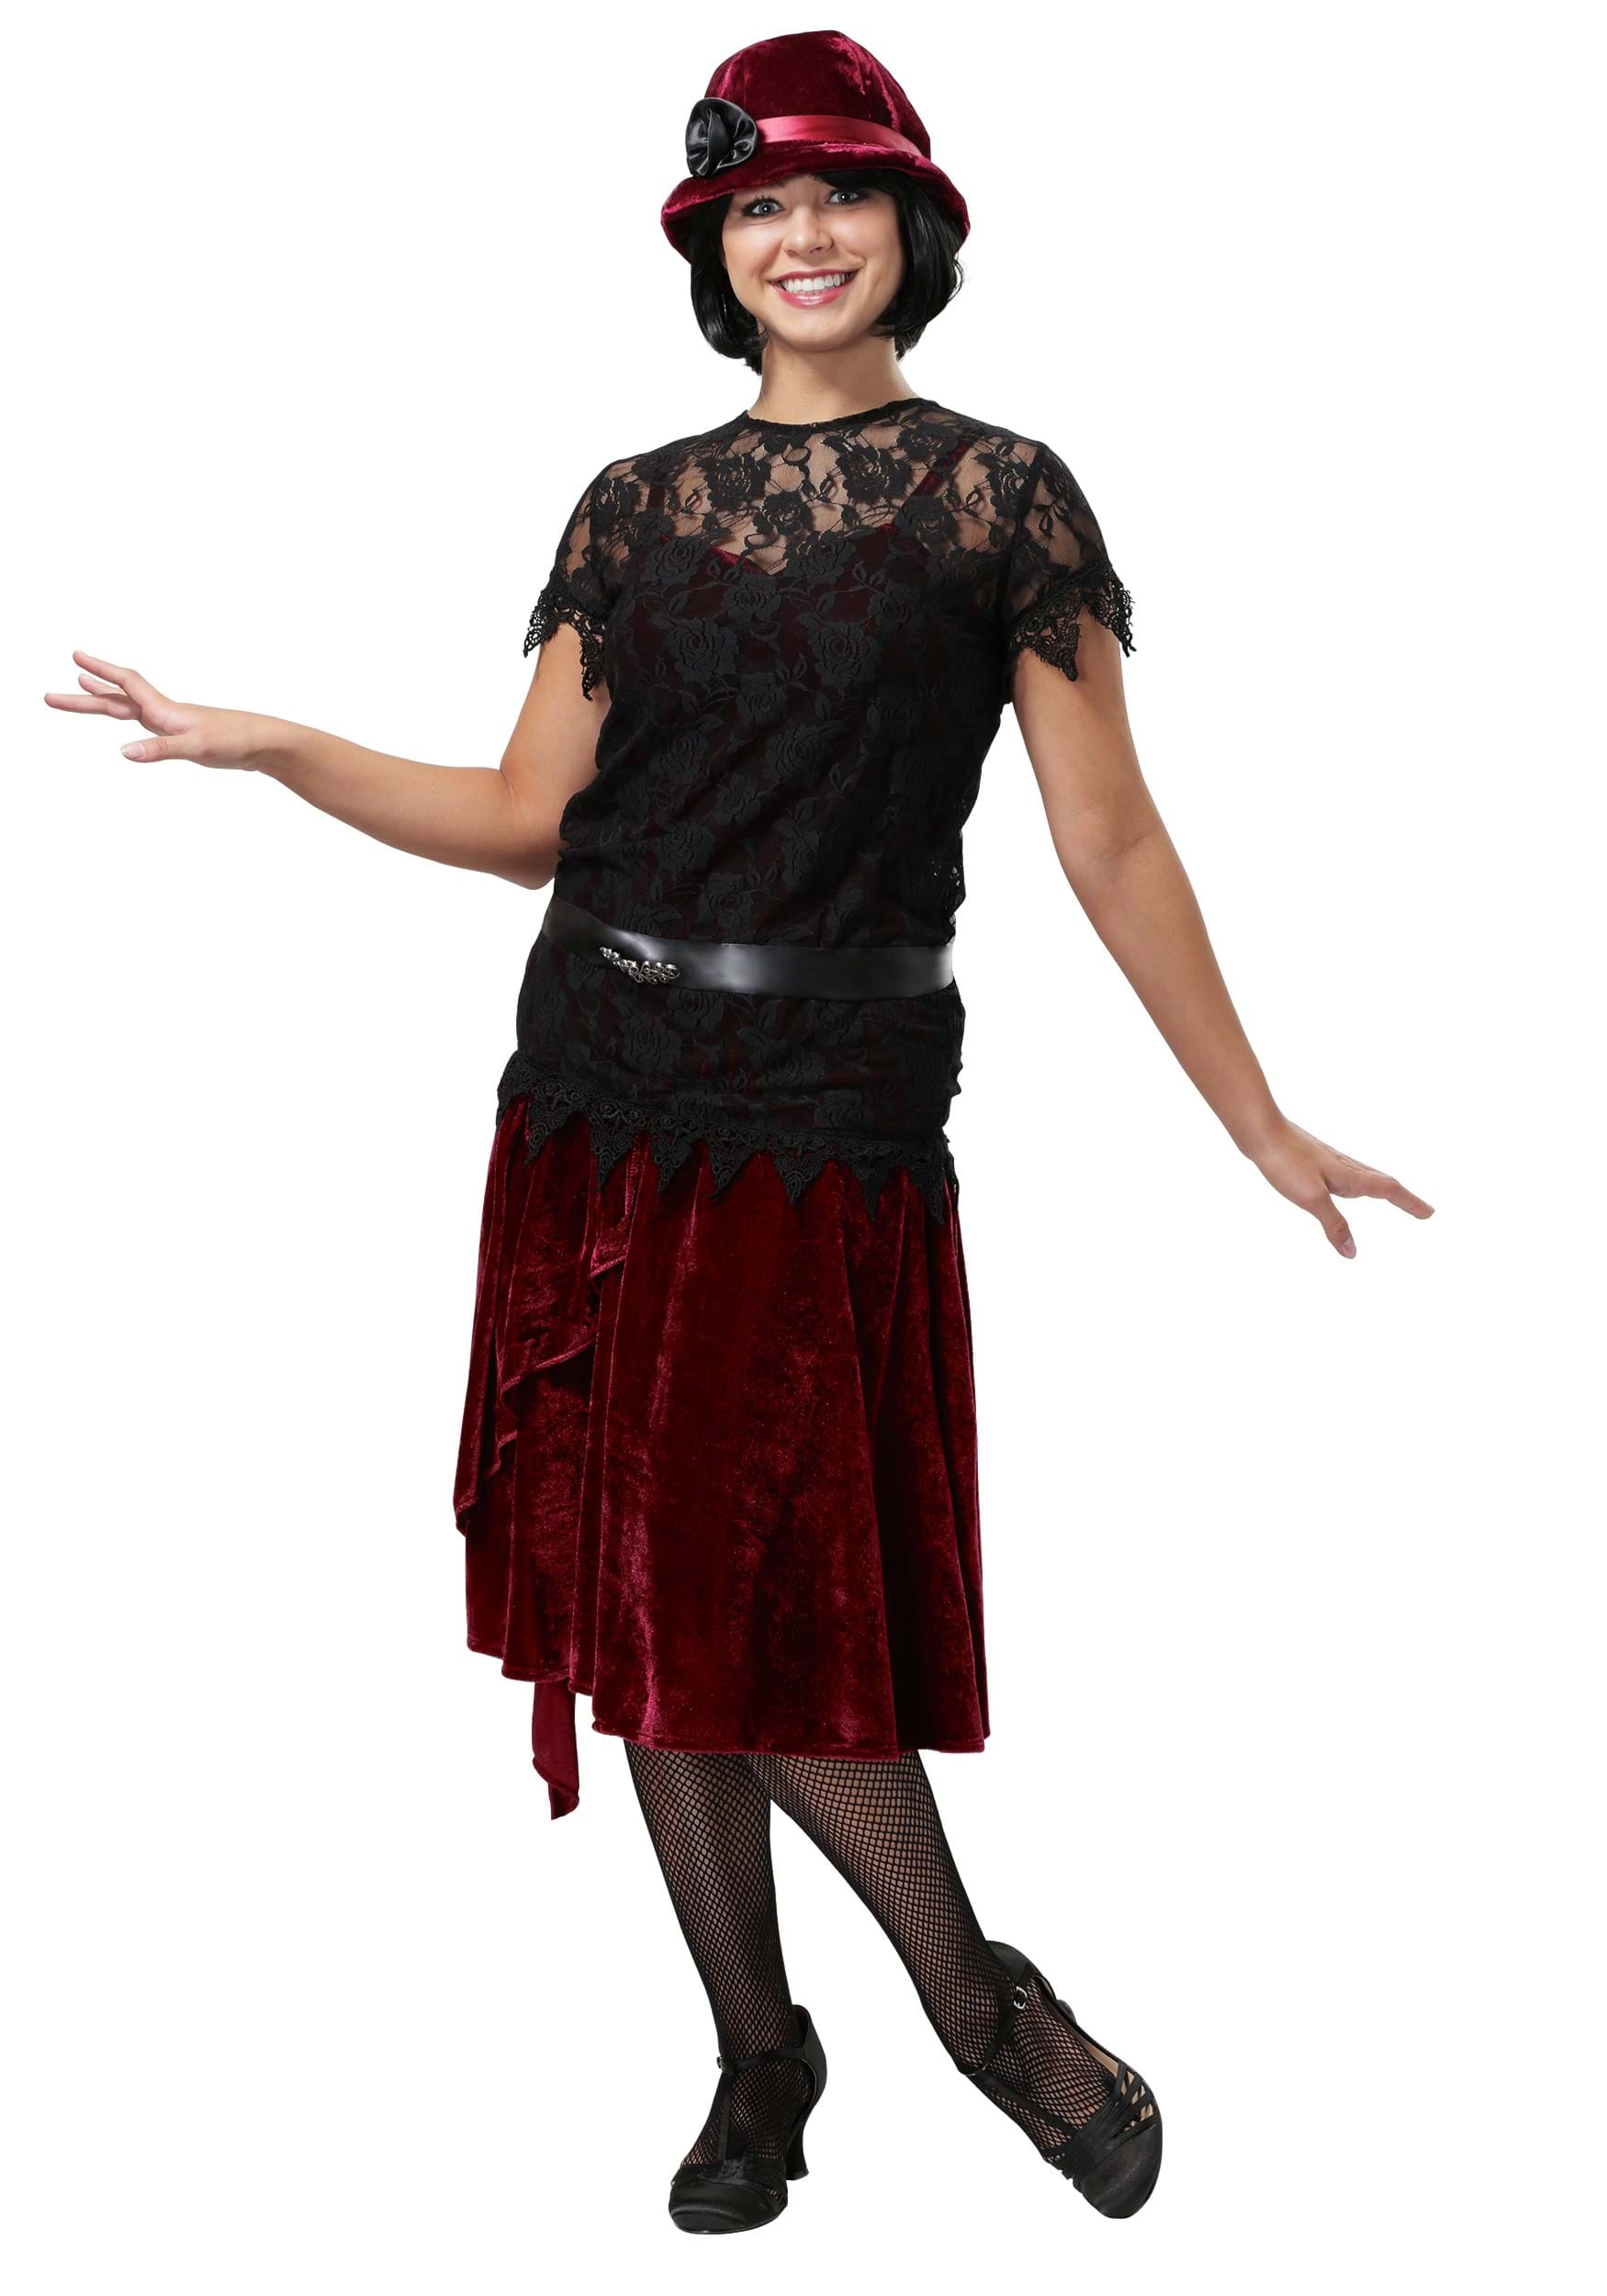 1920s Style Dresses, 1920s Dress Fashions You Will Love Plus Size Toe Tappin Flapper Costume for Women $39.99 AT vintagedancer.com